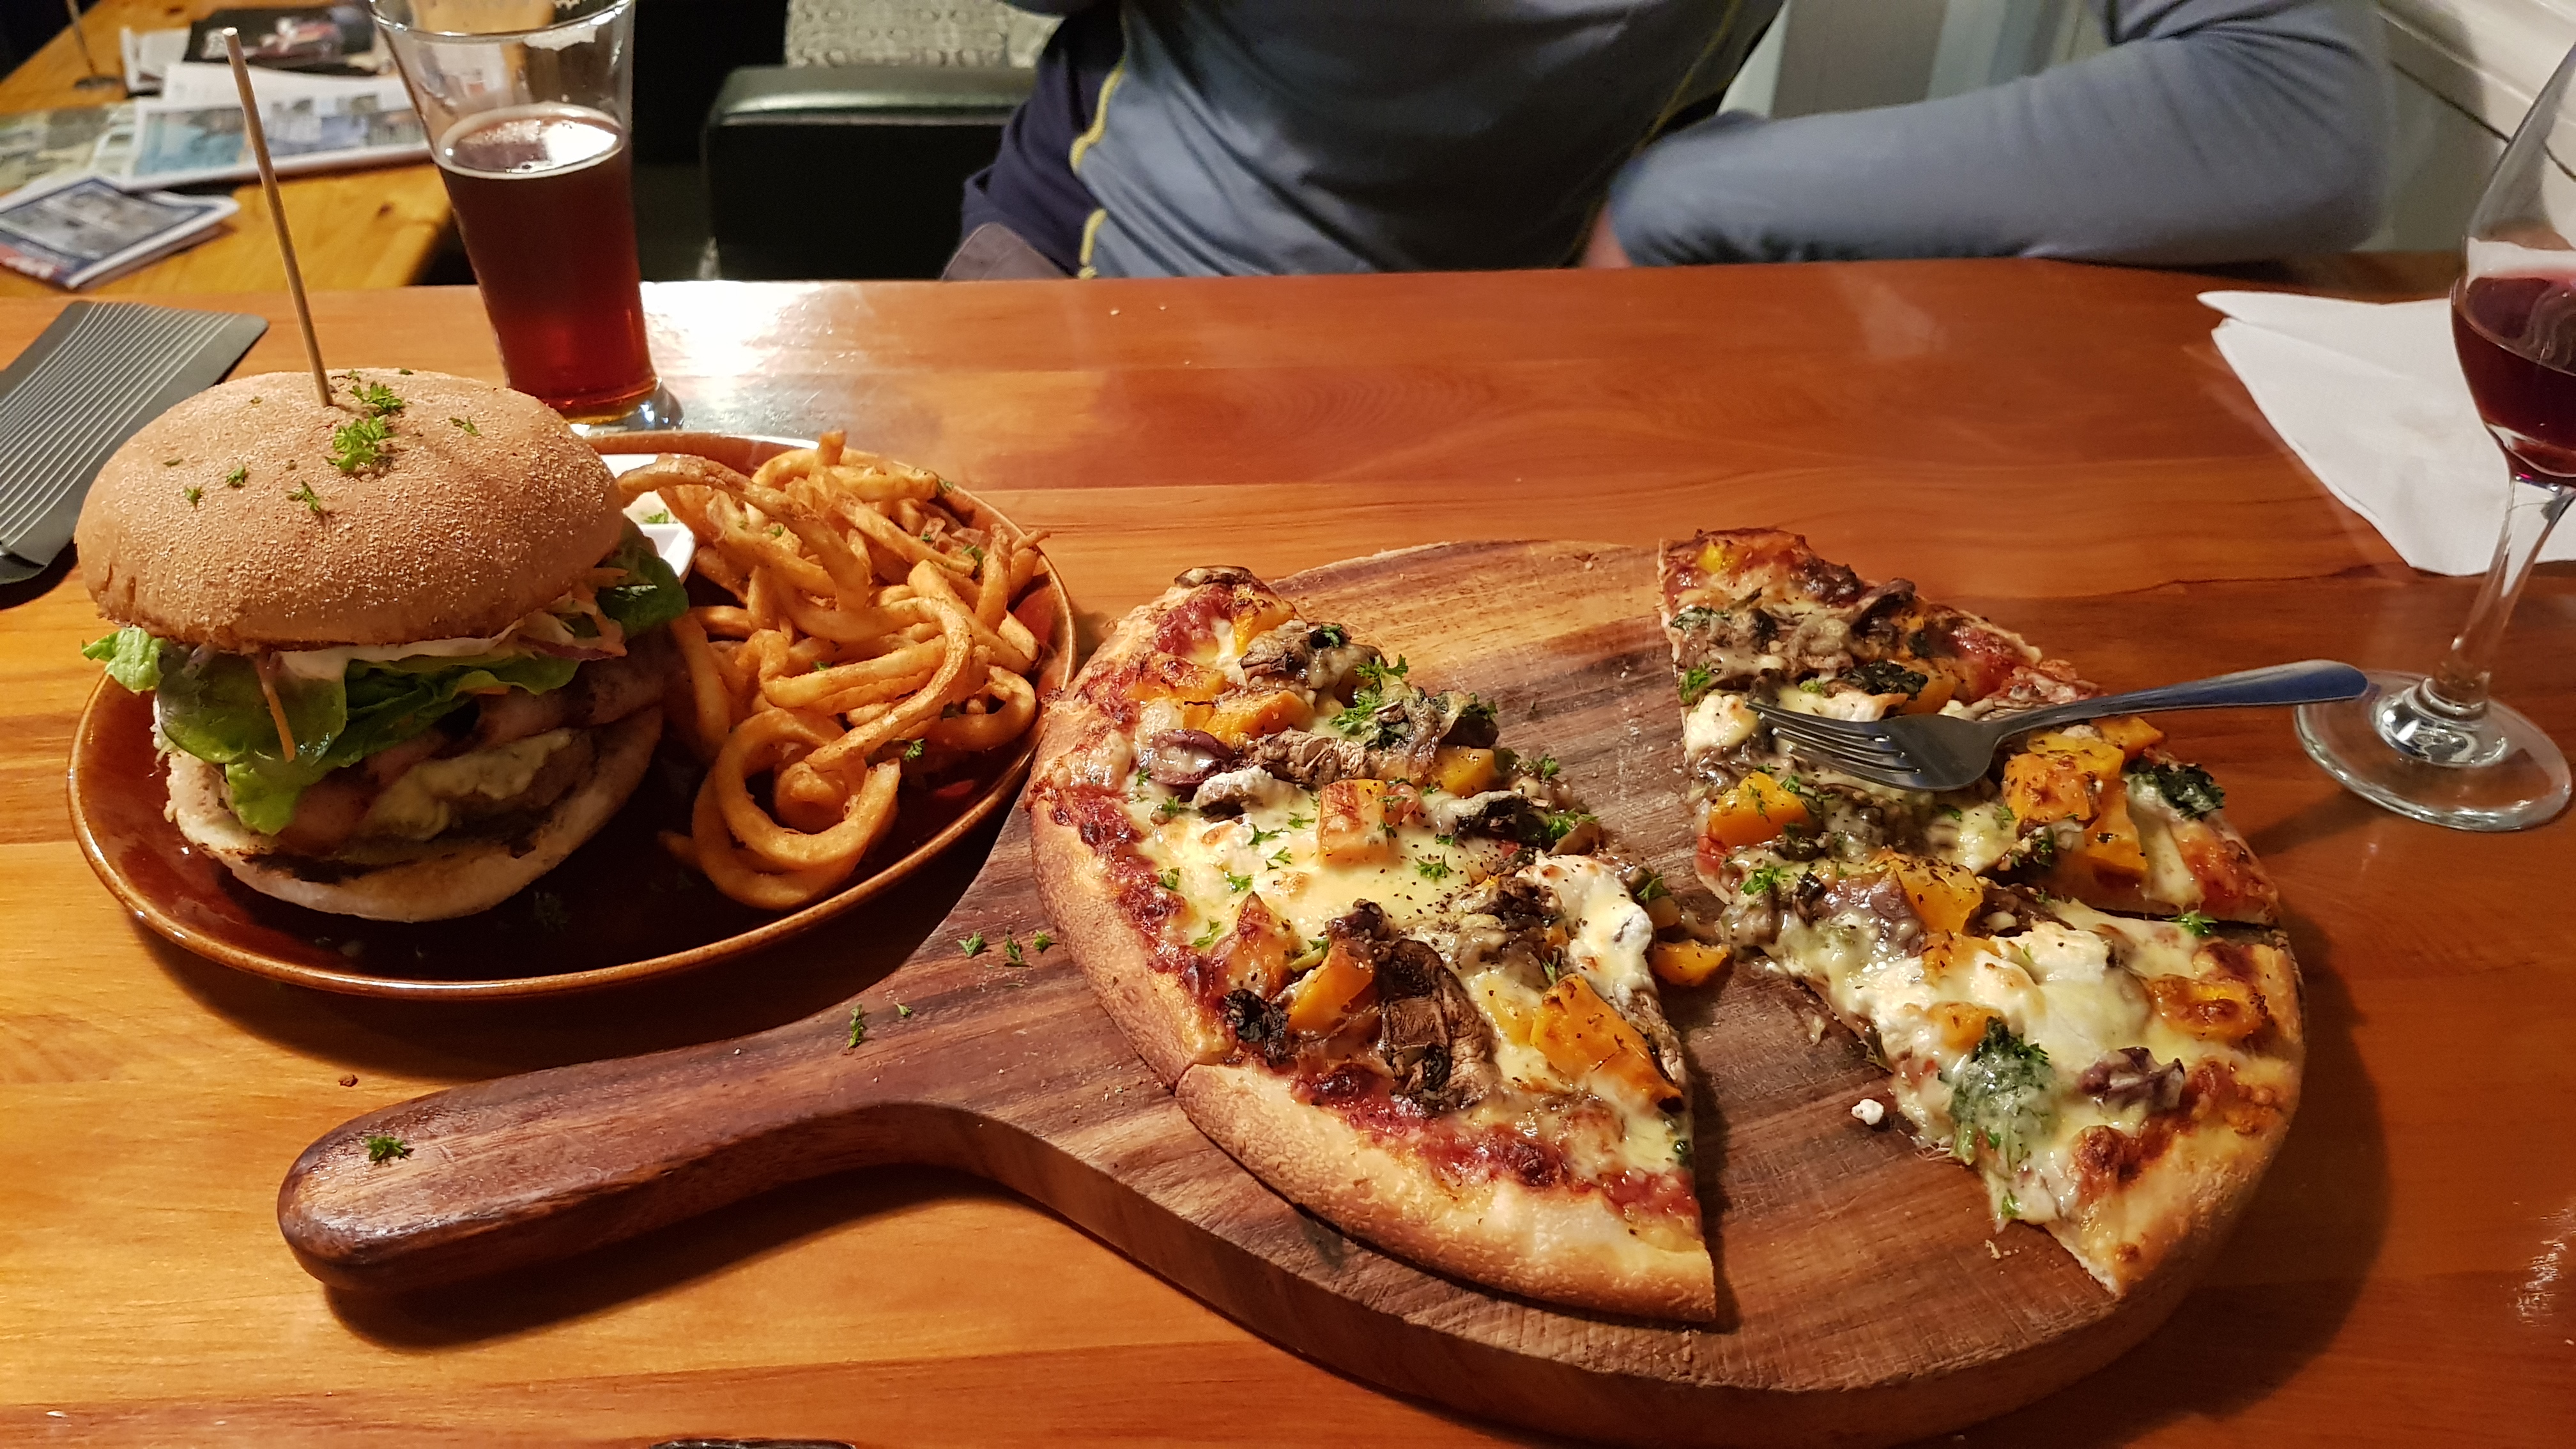 Delicious burger and pizza at the Sprig in Mot